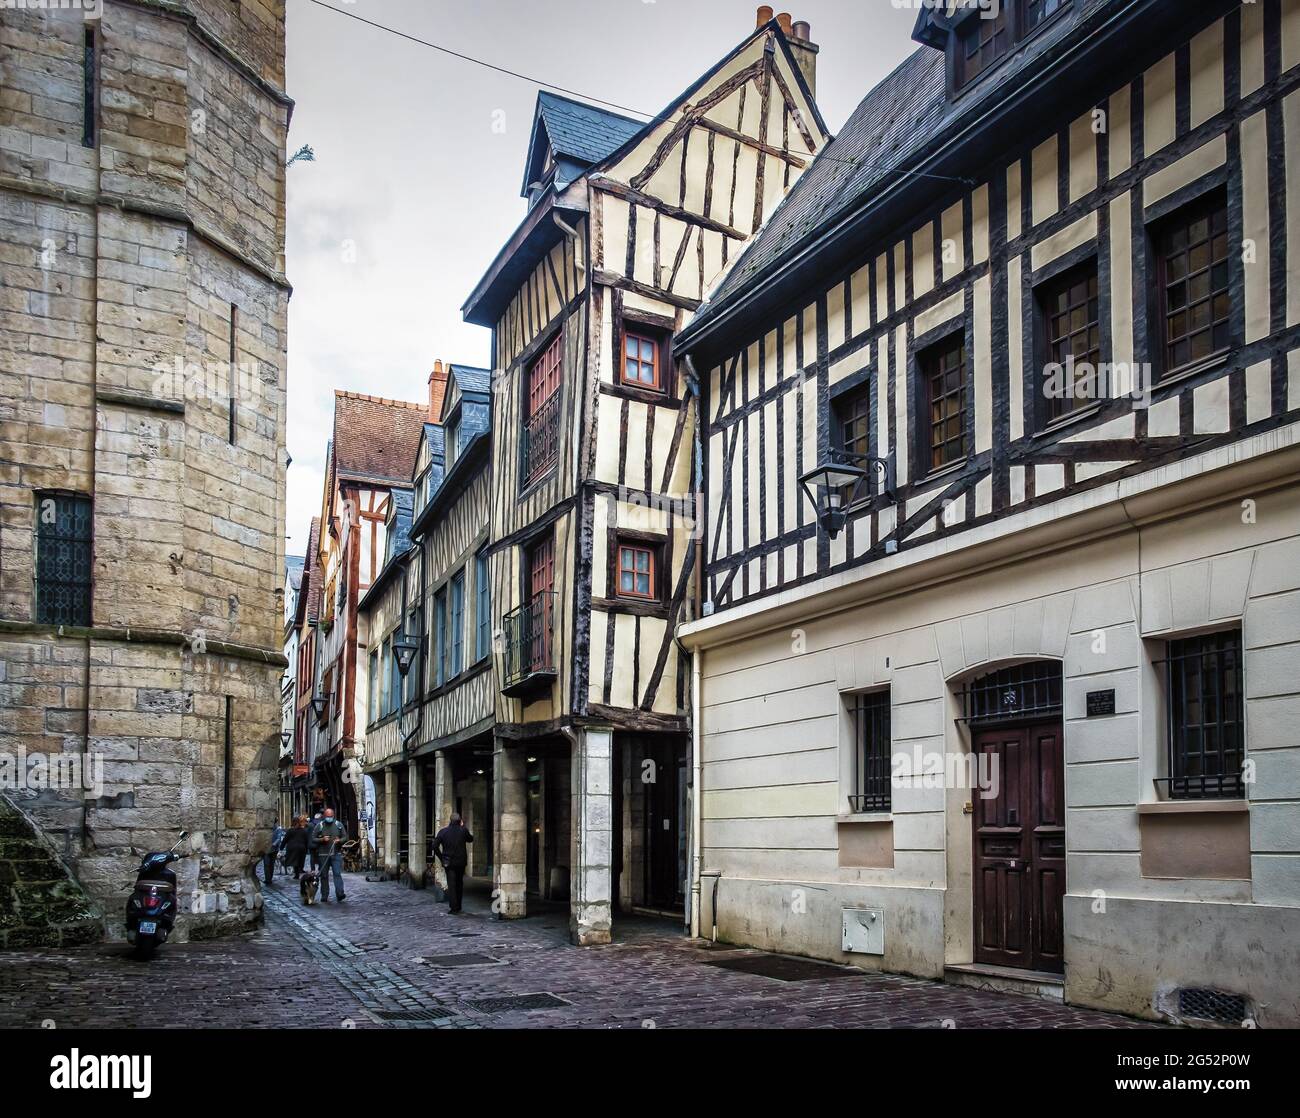 Rouen, France, Oct 2020, view of a  cobblestoned street in the pedestrian centre with medieval half-timbered houses Stock Photo